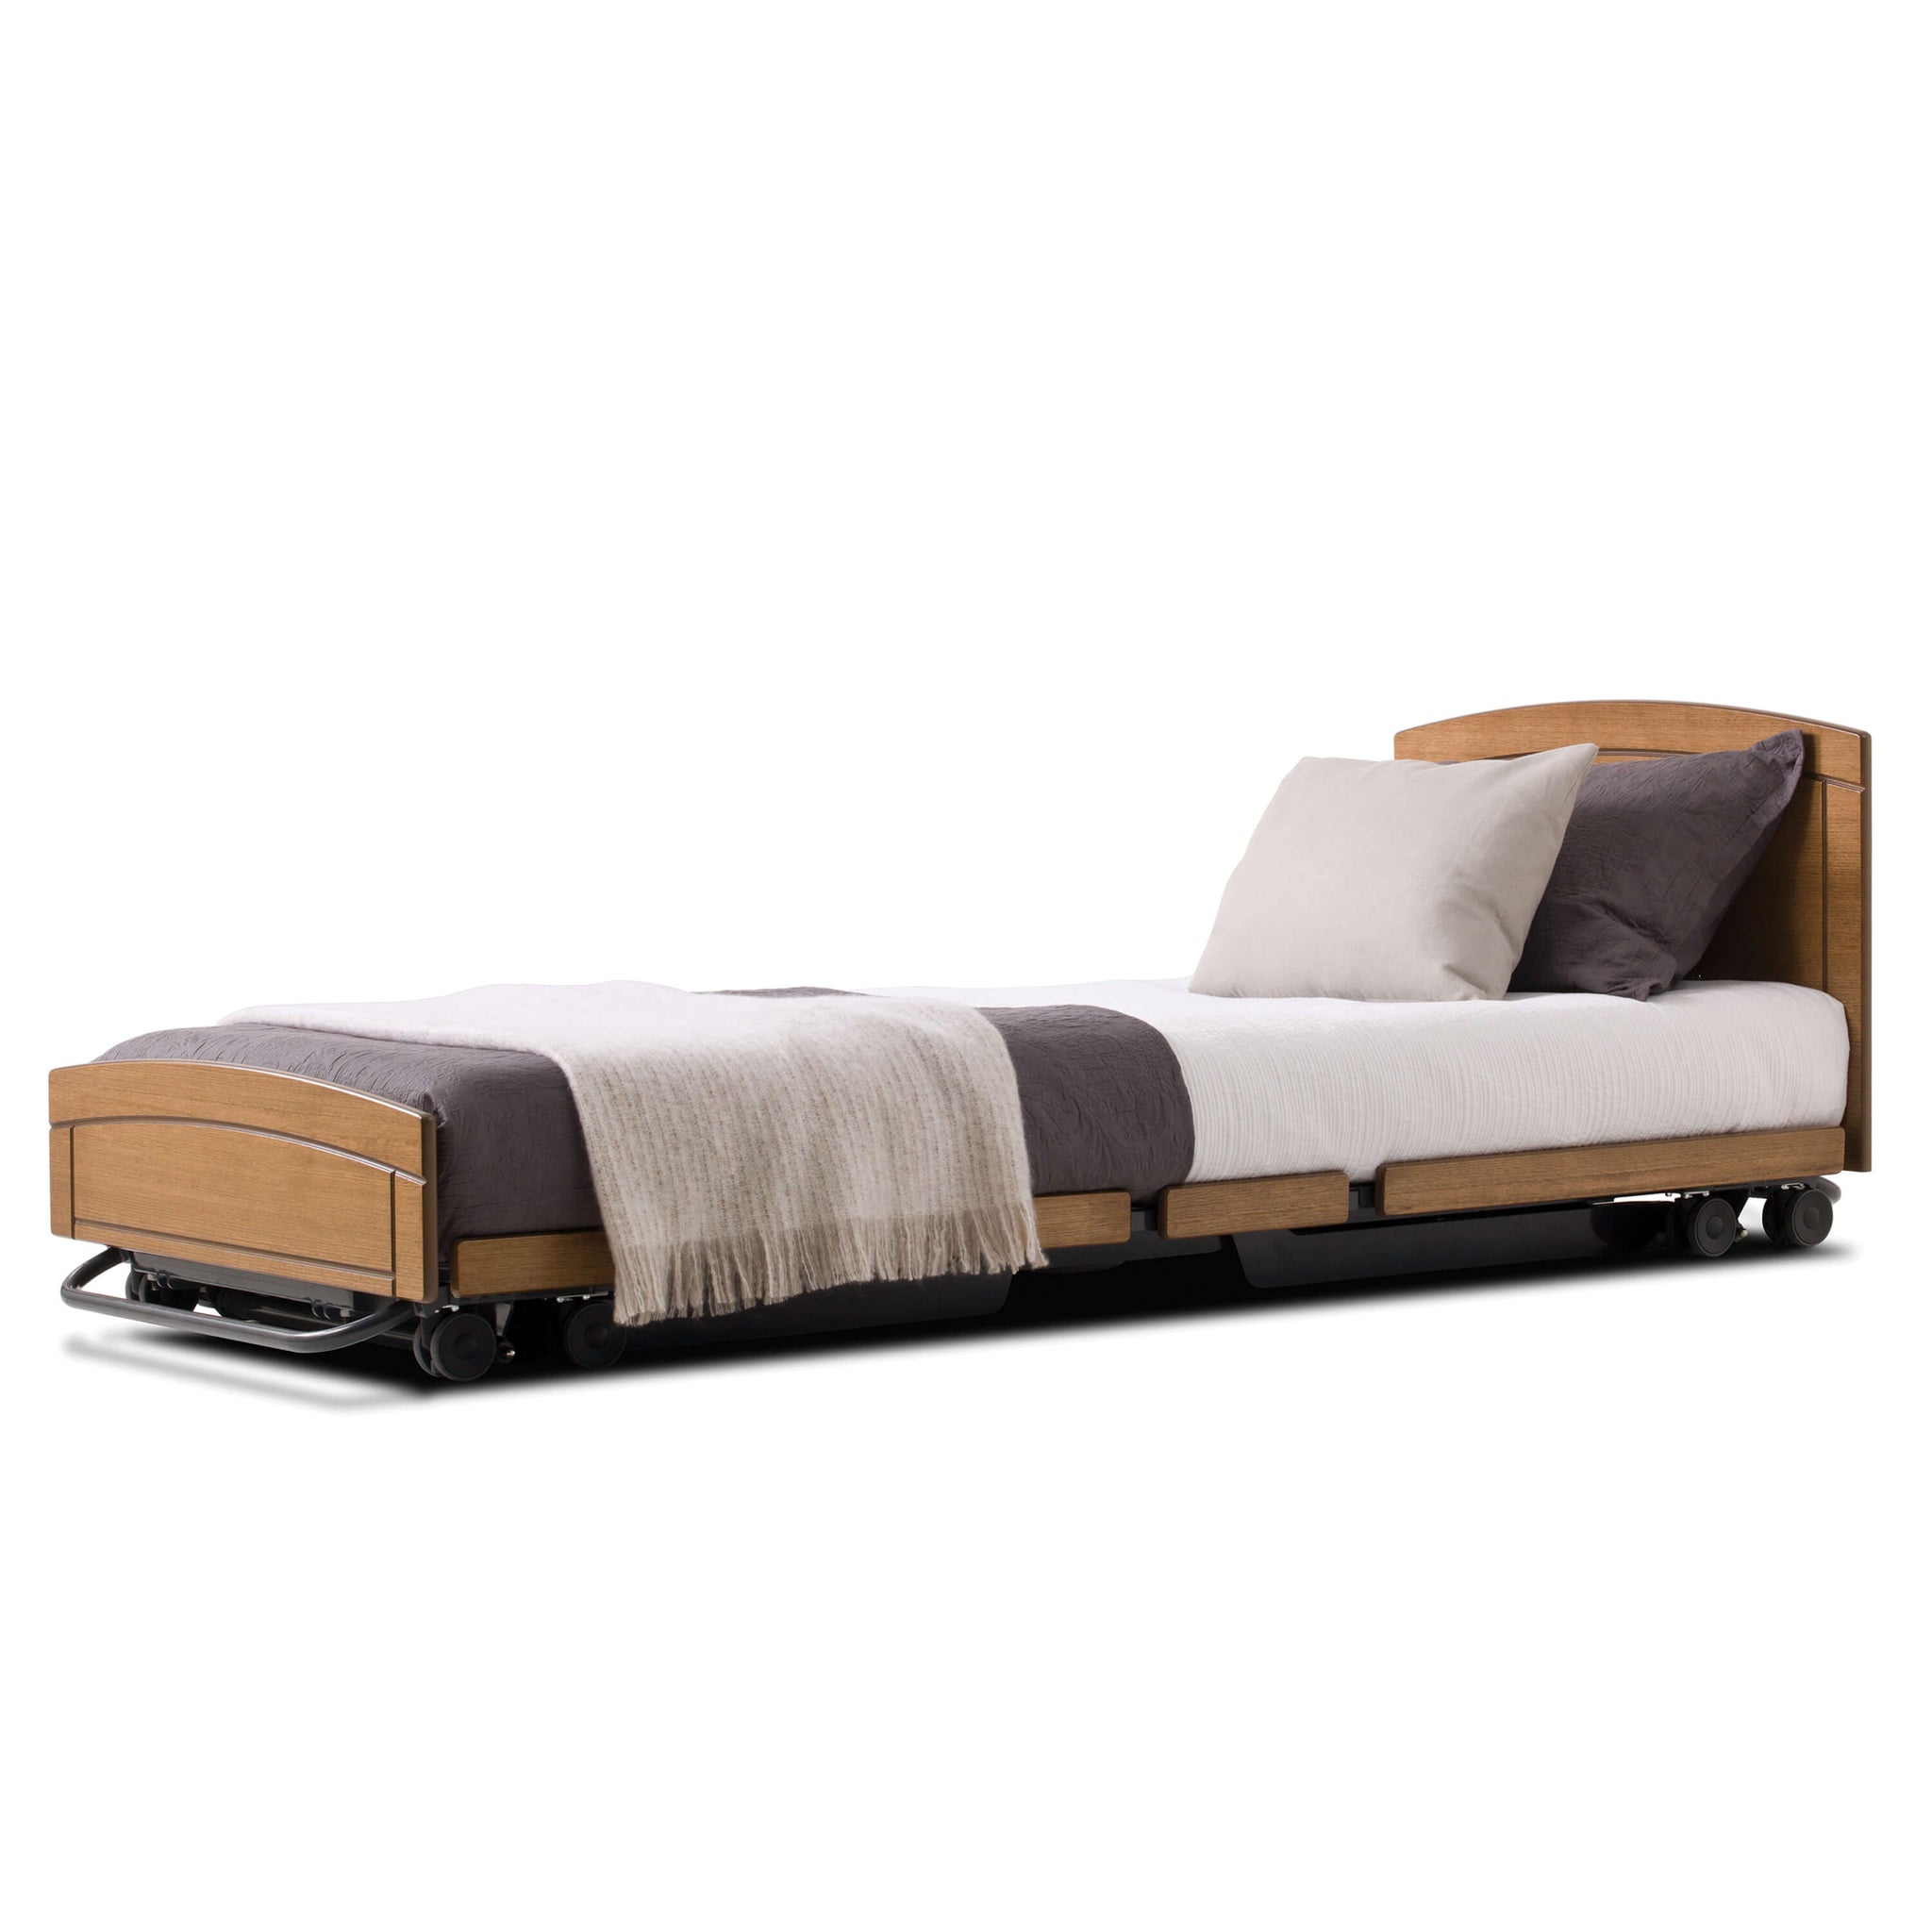 Stralus S-Line Low Bed with Trend- King Single, Milano Walnut